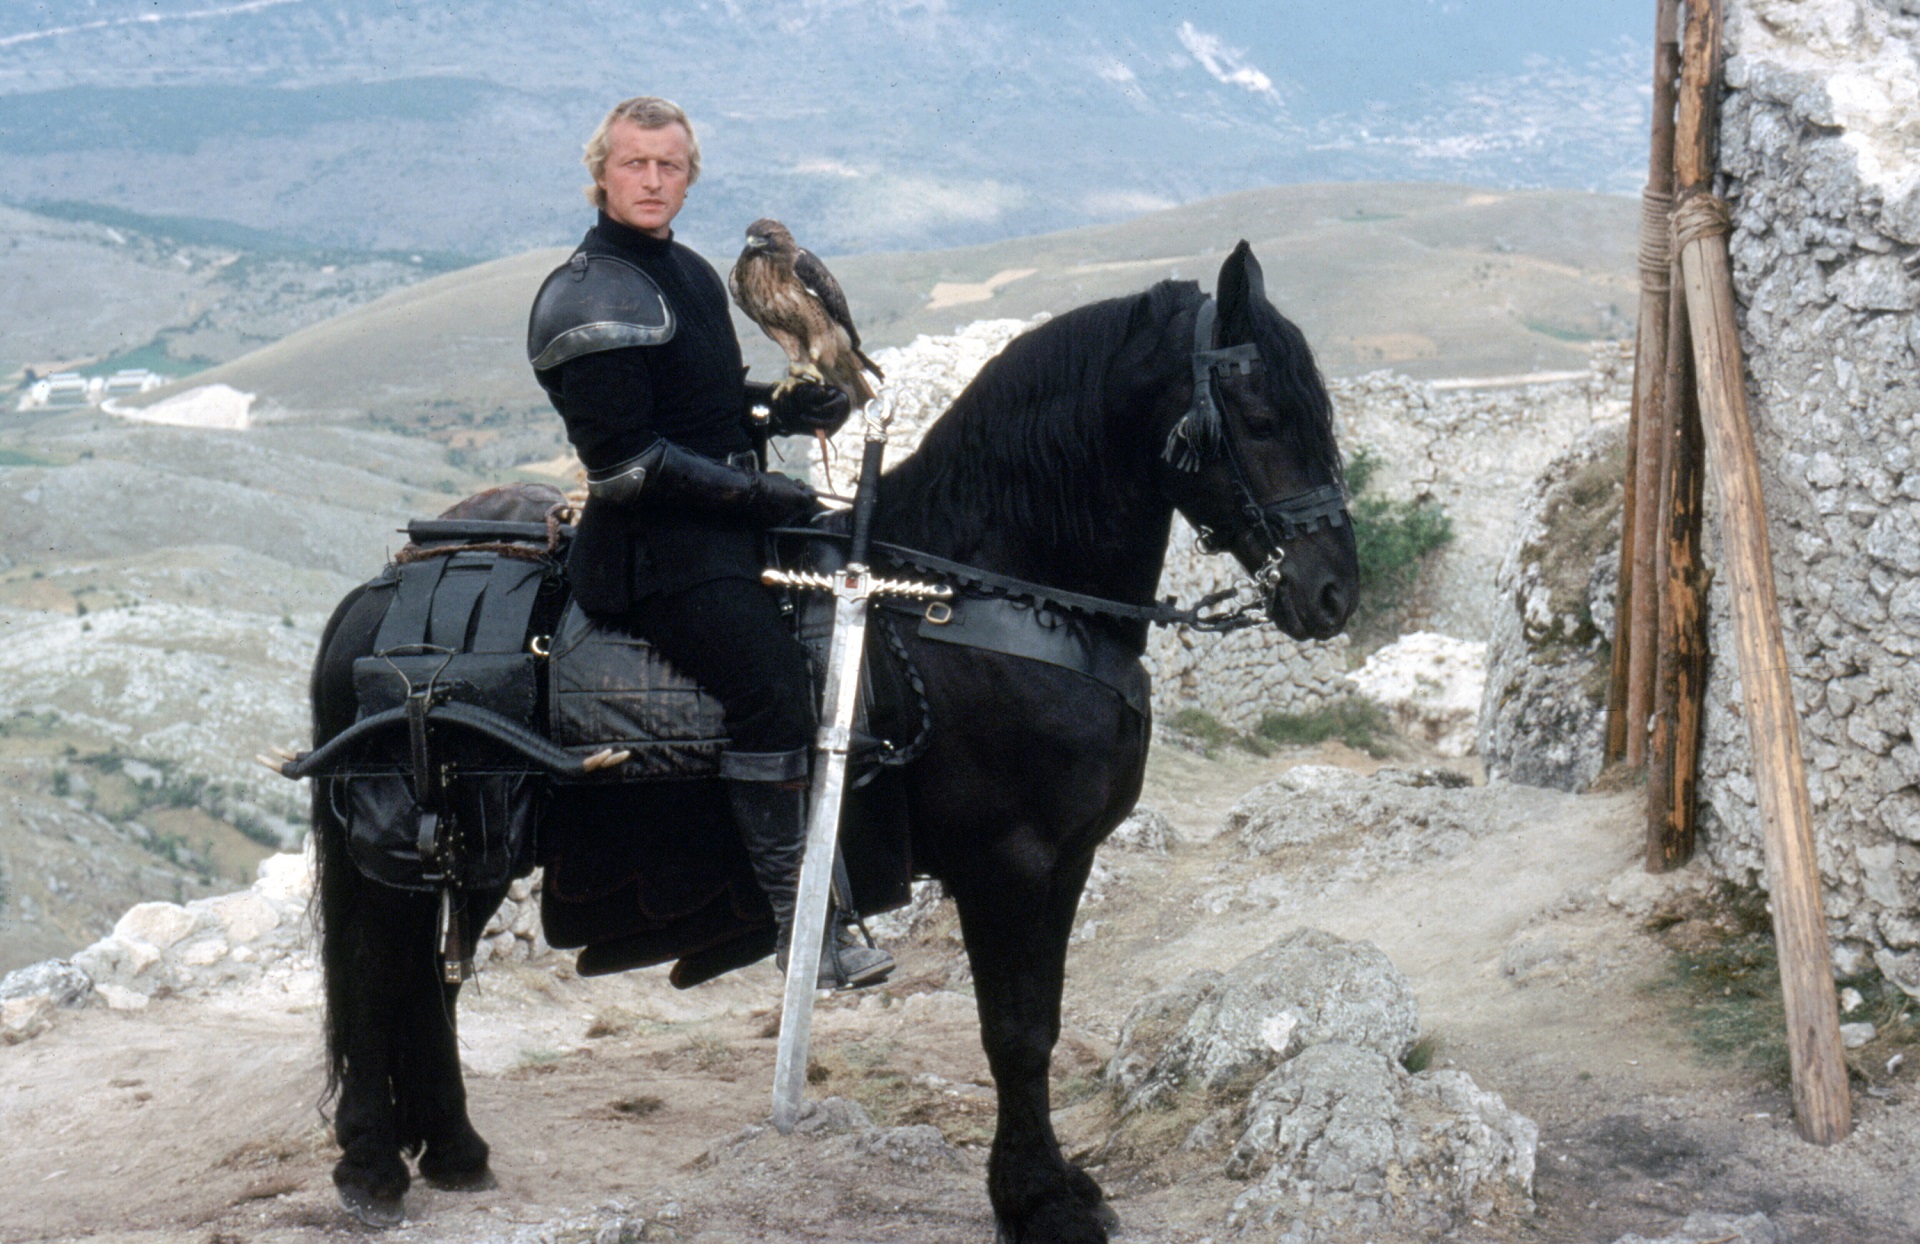 Rutger Hauer as the knight Etienne Navarre carrying the Ladyhawke (1985)